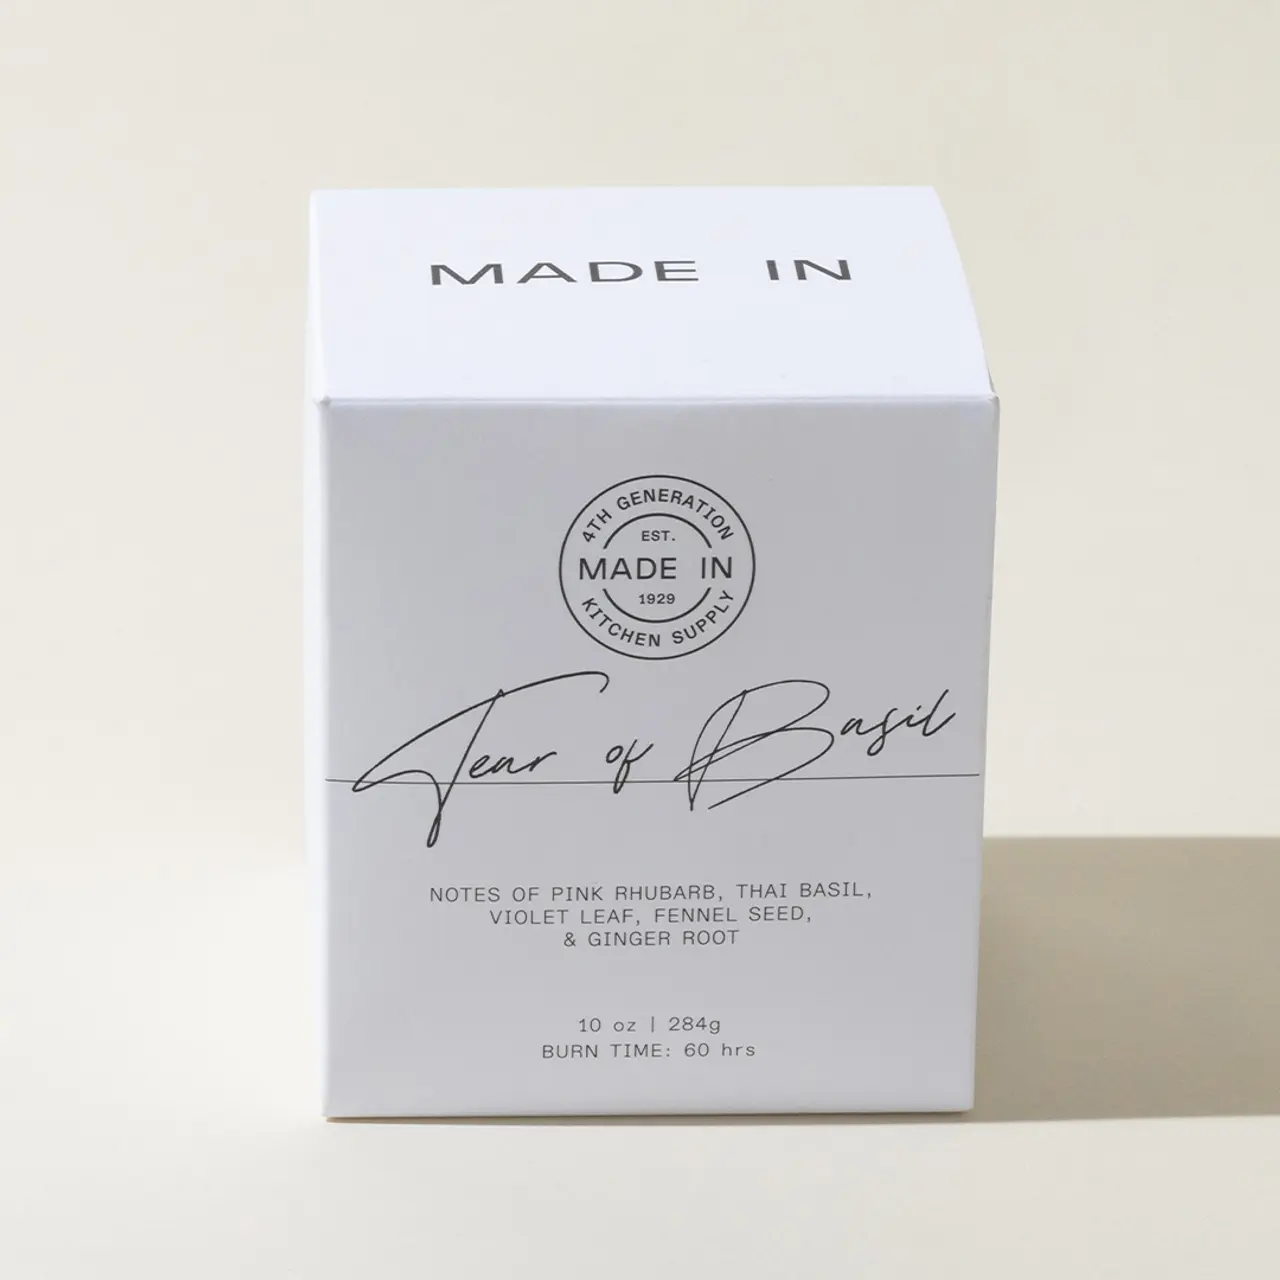 A white candle box with the words "MADE IN" at the top and "Terra of Basil" in cursive, along with a description of the candle's scent notes.